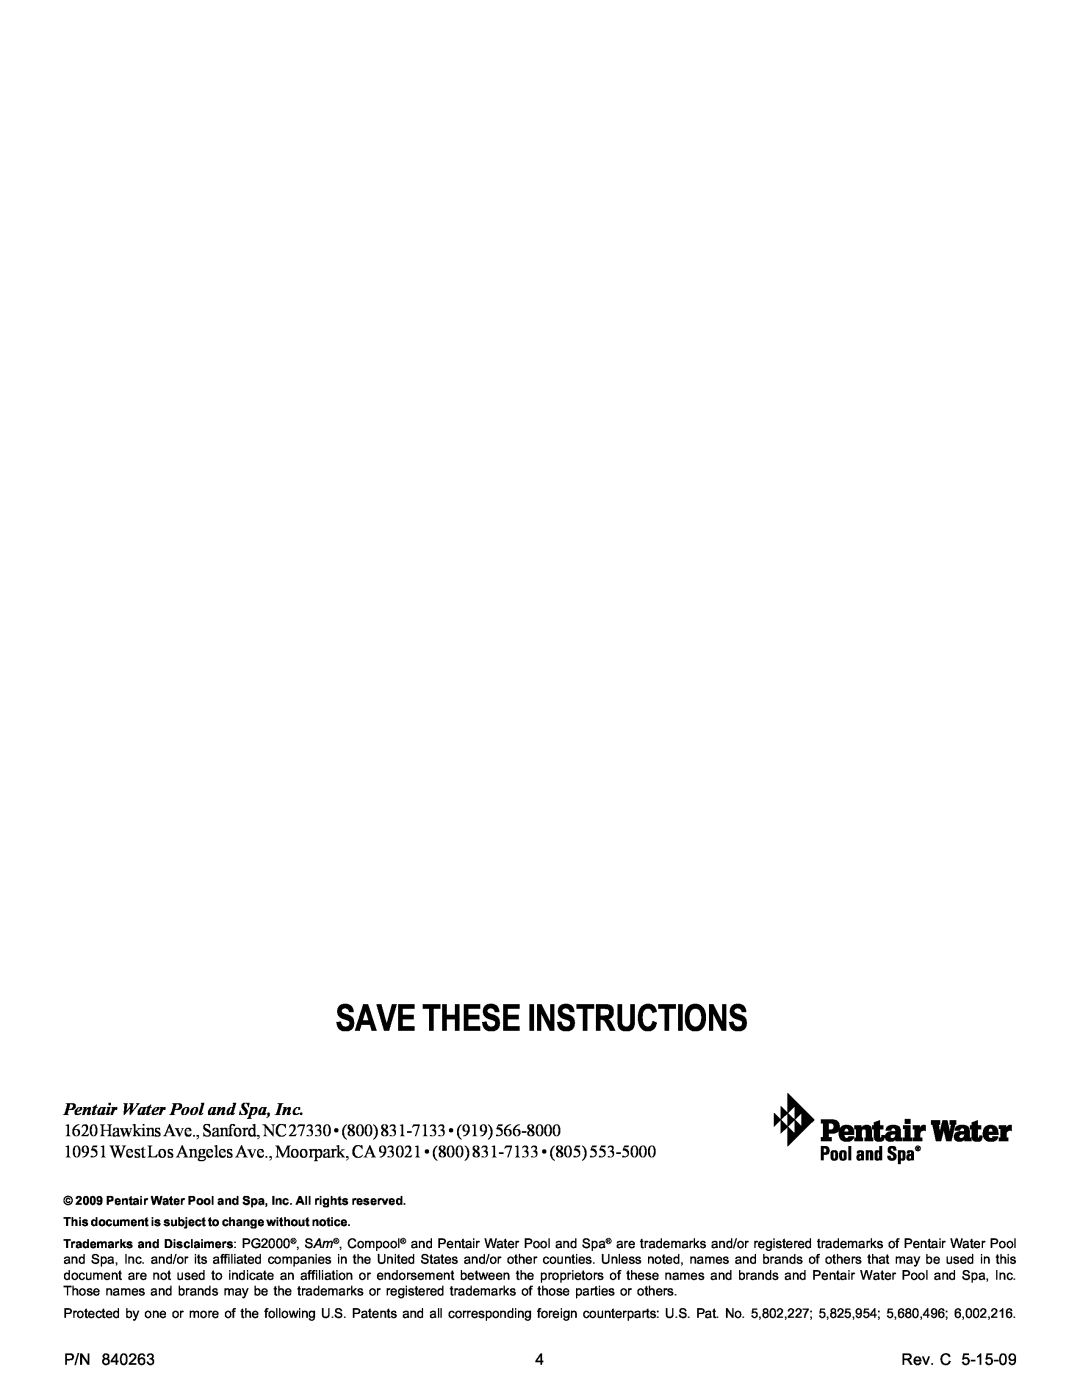 Pentair PG2000 owner manual Save These Instructions, Pentair Water Pool and Spa, Inc, Rev. C 